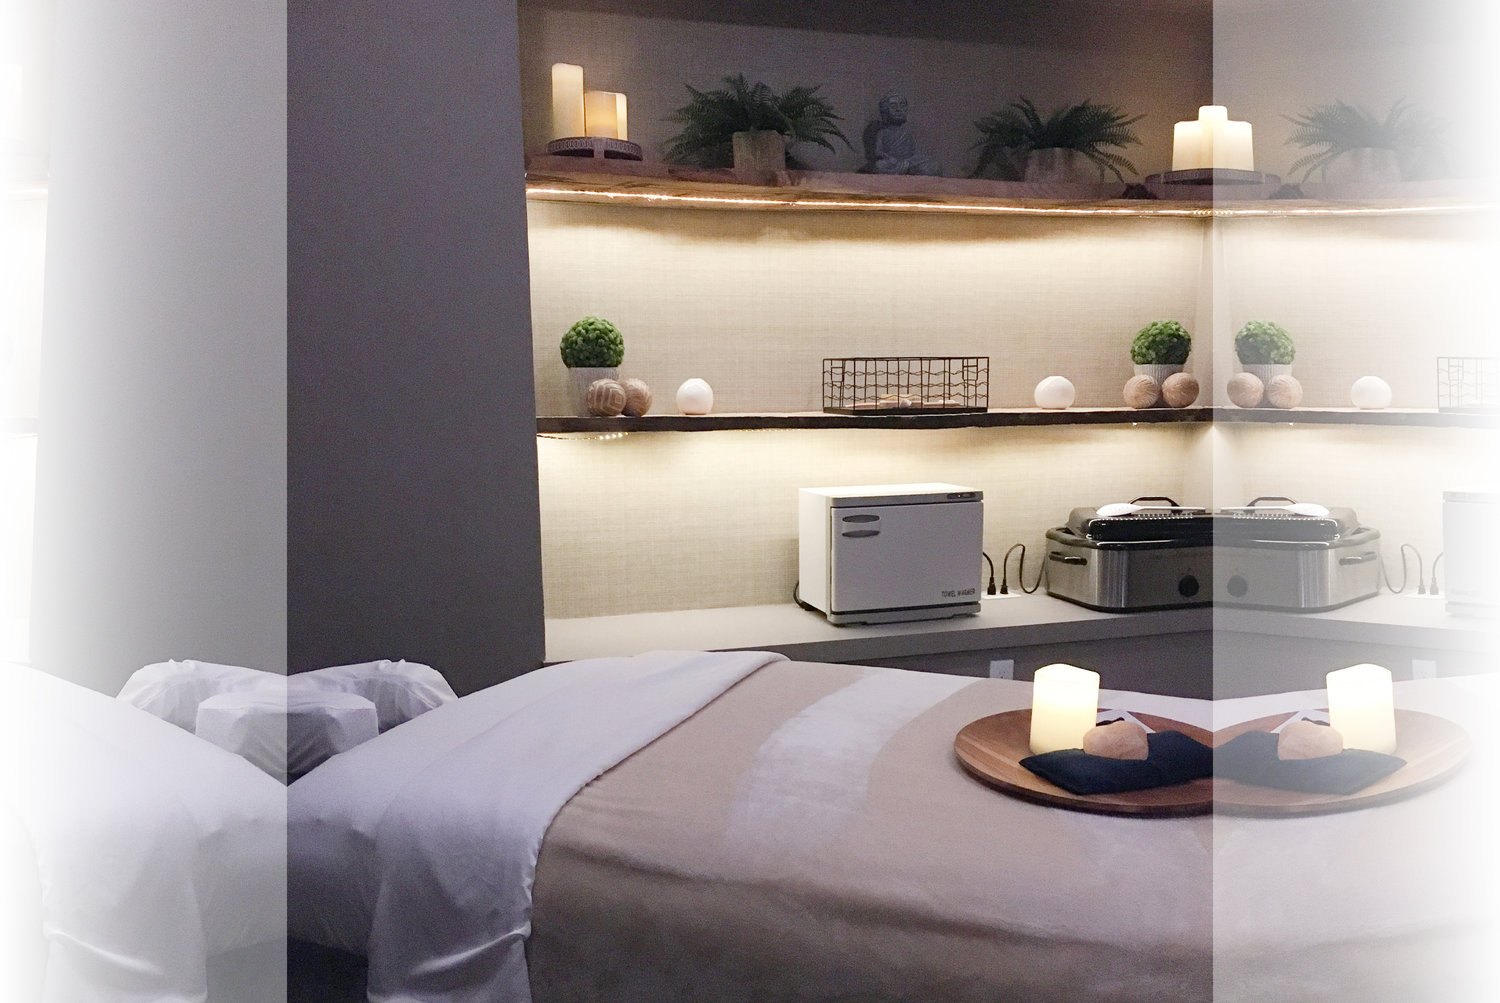 A treatment room outfitted for relaxation